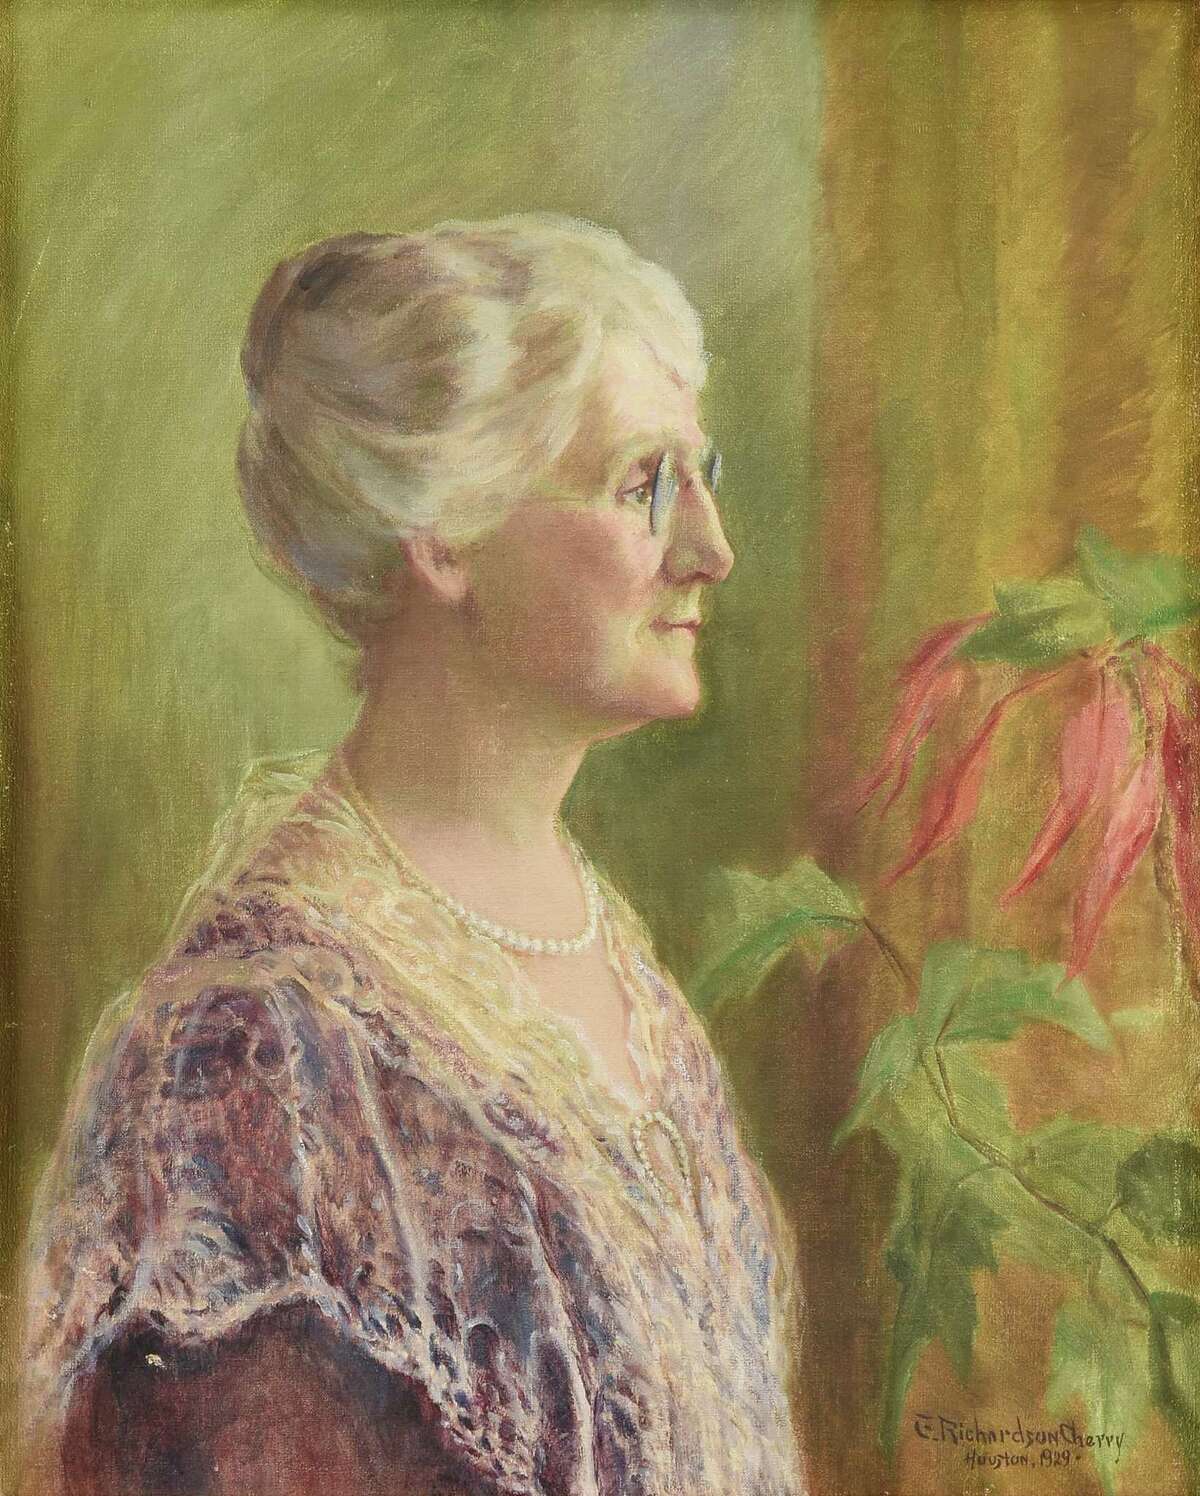 This painting by Emma Richardson Cherry (1859-1954), “Favorite Aunt of Jesse H. Jones, Louisa Woolard Jones,” 1929, will be part of virtual auction Oct. 1, 2022, by Simpson Galleries. The auction includes several items from the estate of Jesse H. Jones and his wife Mary Gibbs Jones; the items had been given to Houston Endowment, a nonprofit founded by the Joneses.